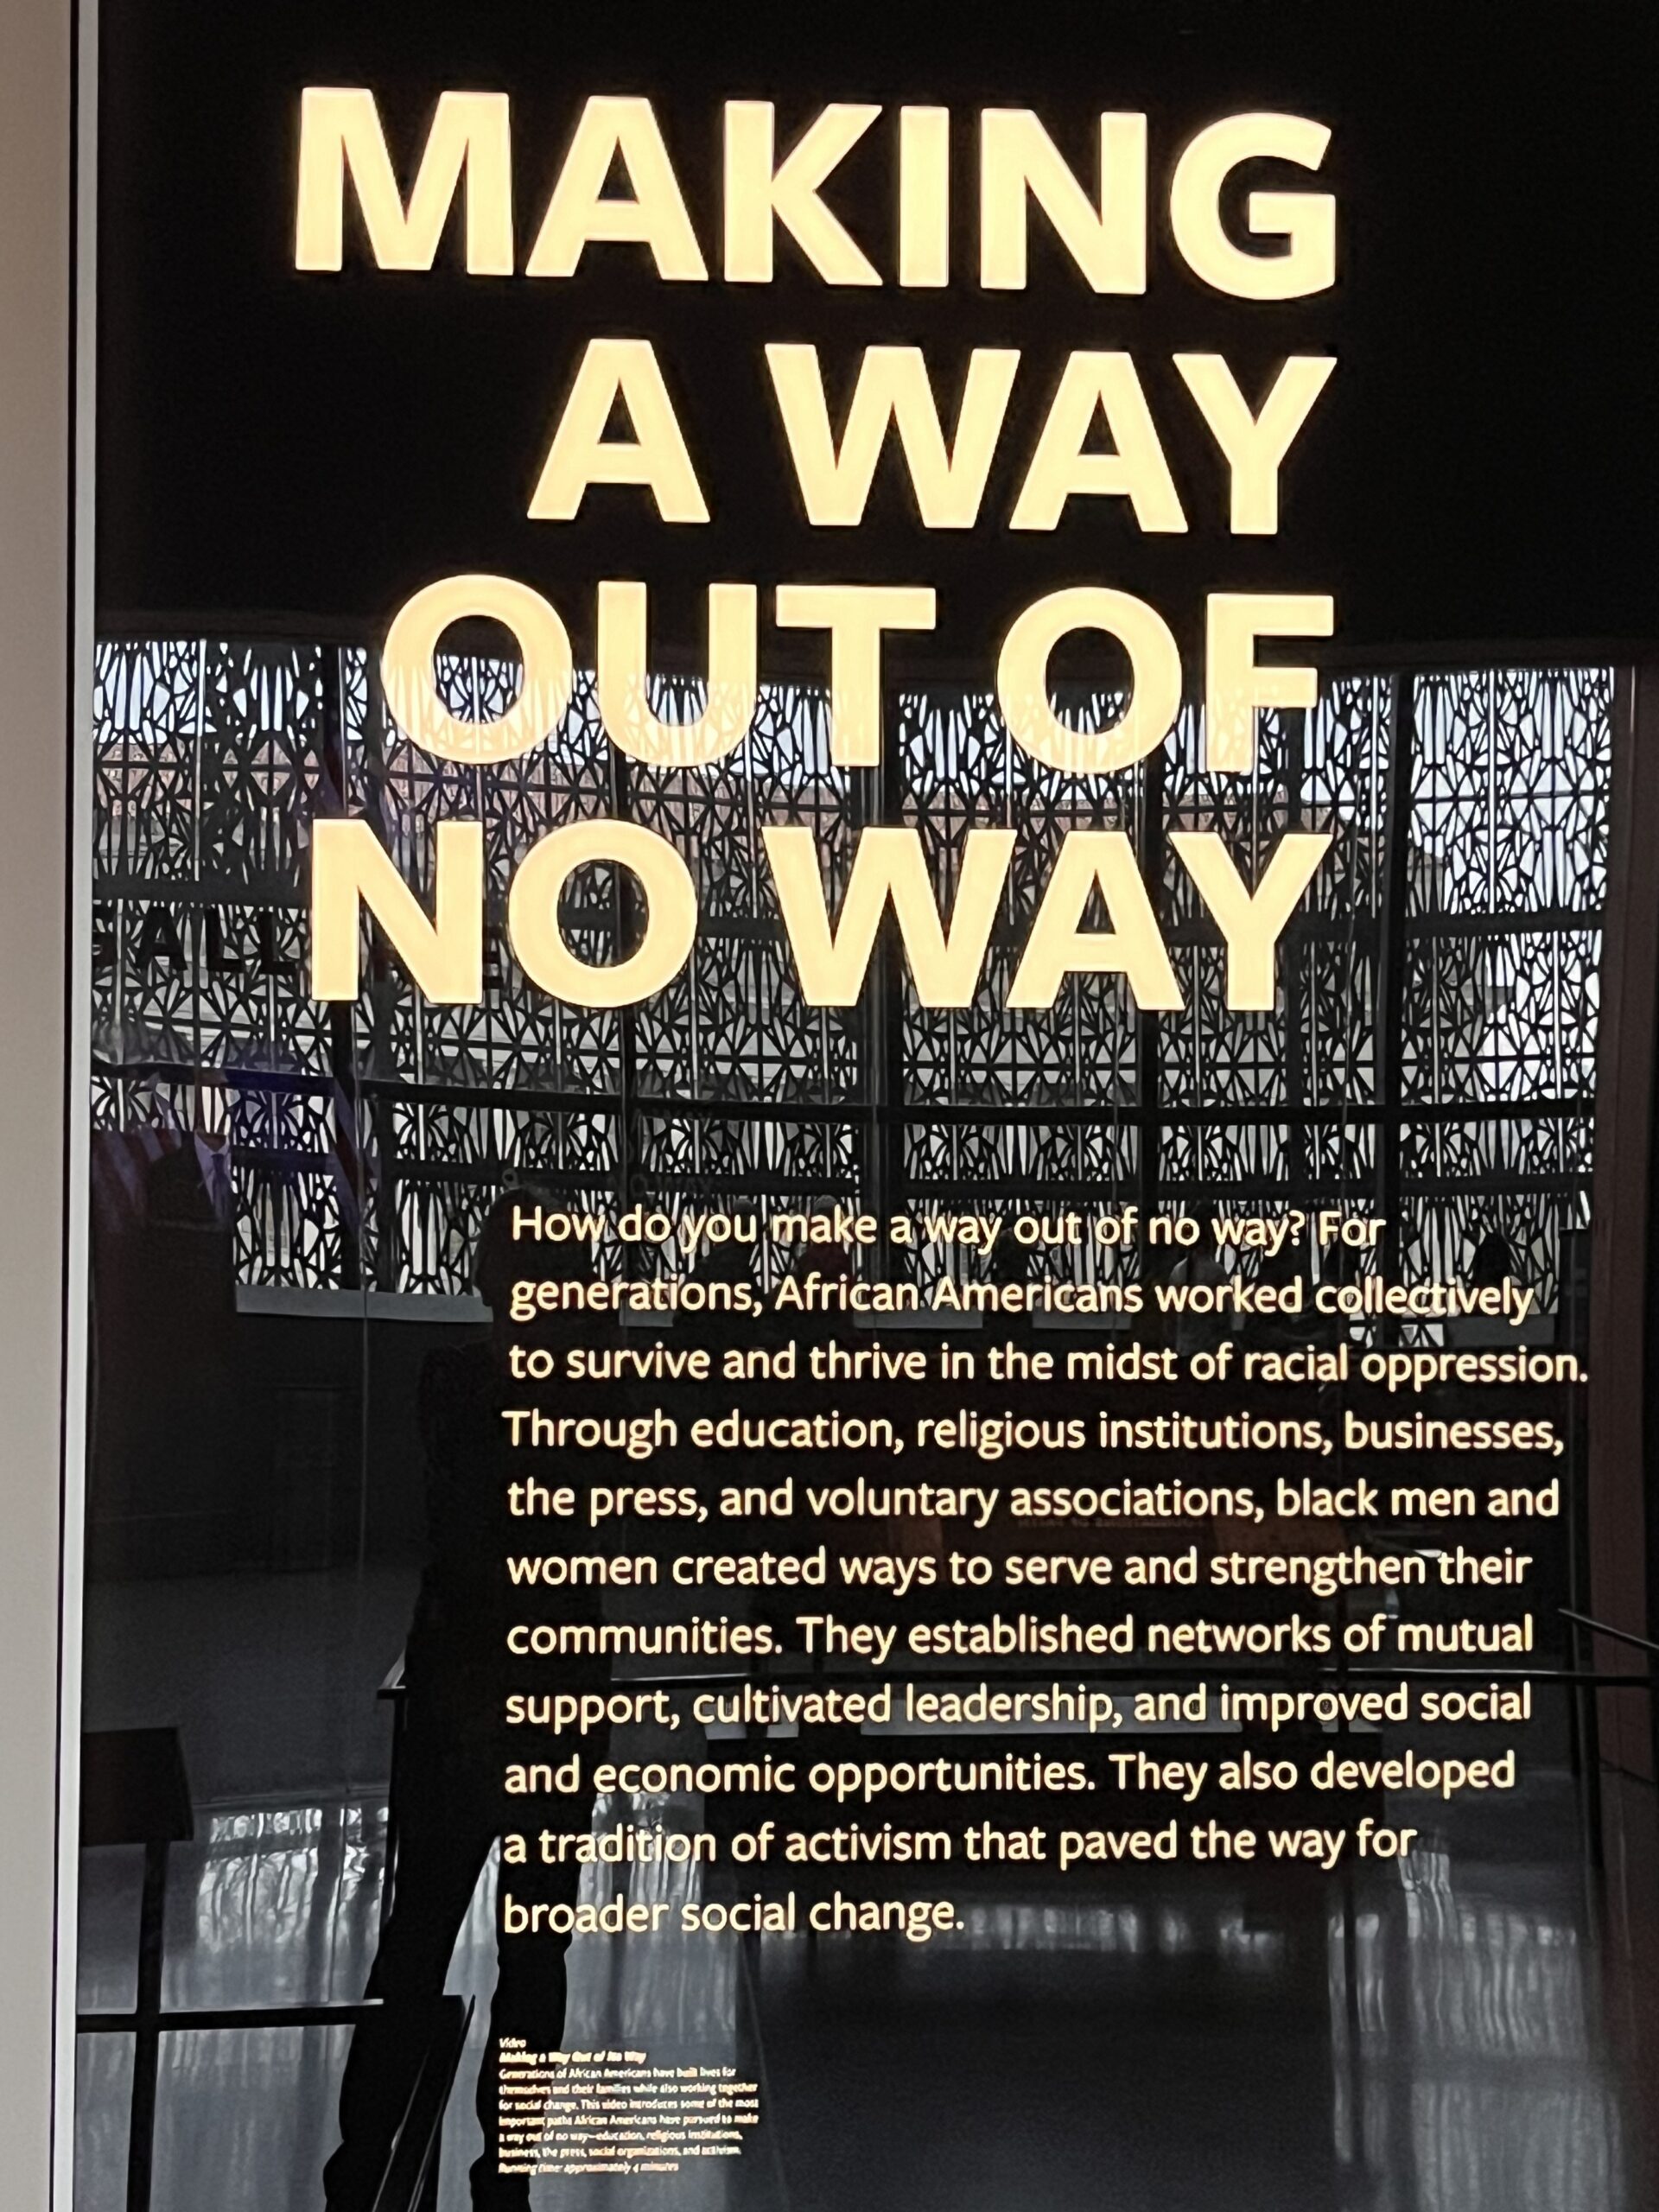 Making a Way Out of No Way – Selected Exhibits from Smithsonian Museum of African American History